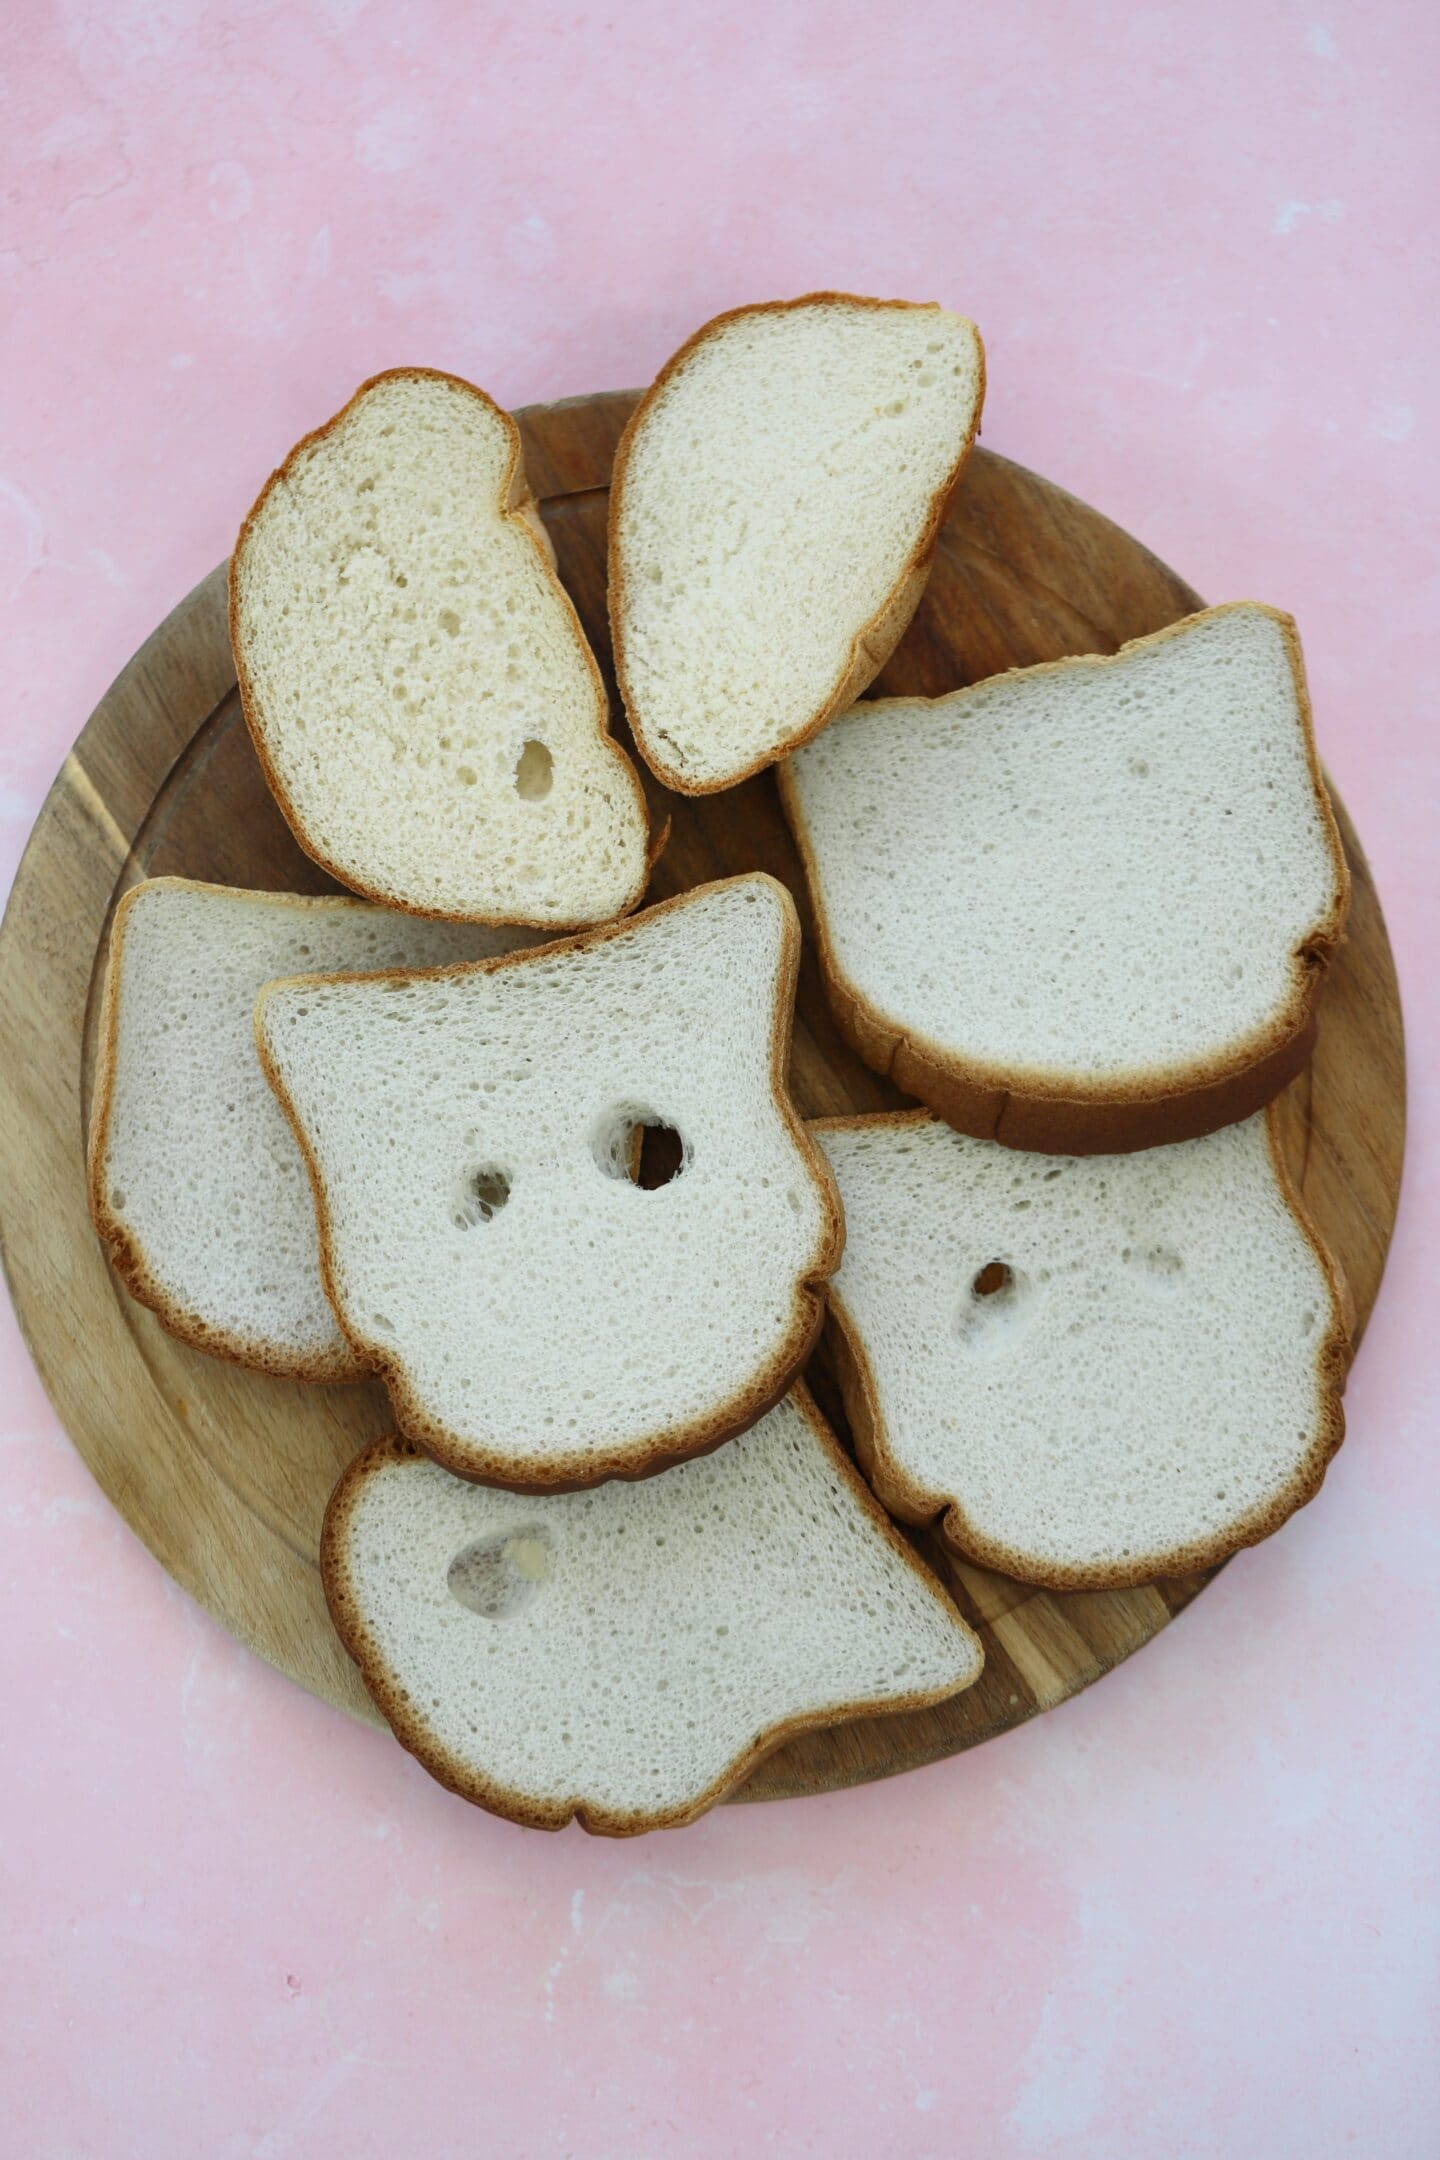 A board of gluten free bread slices with holes.